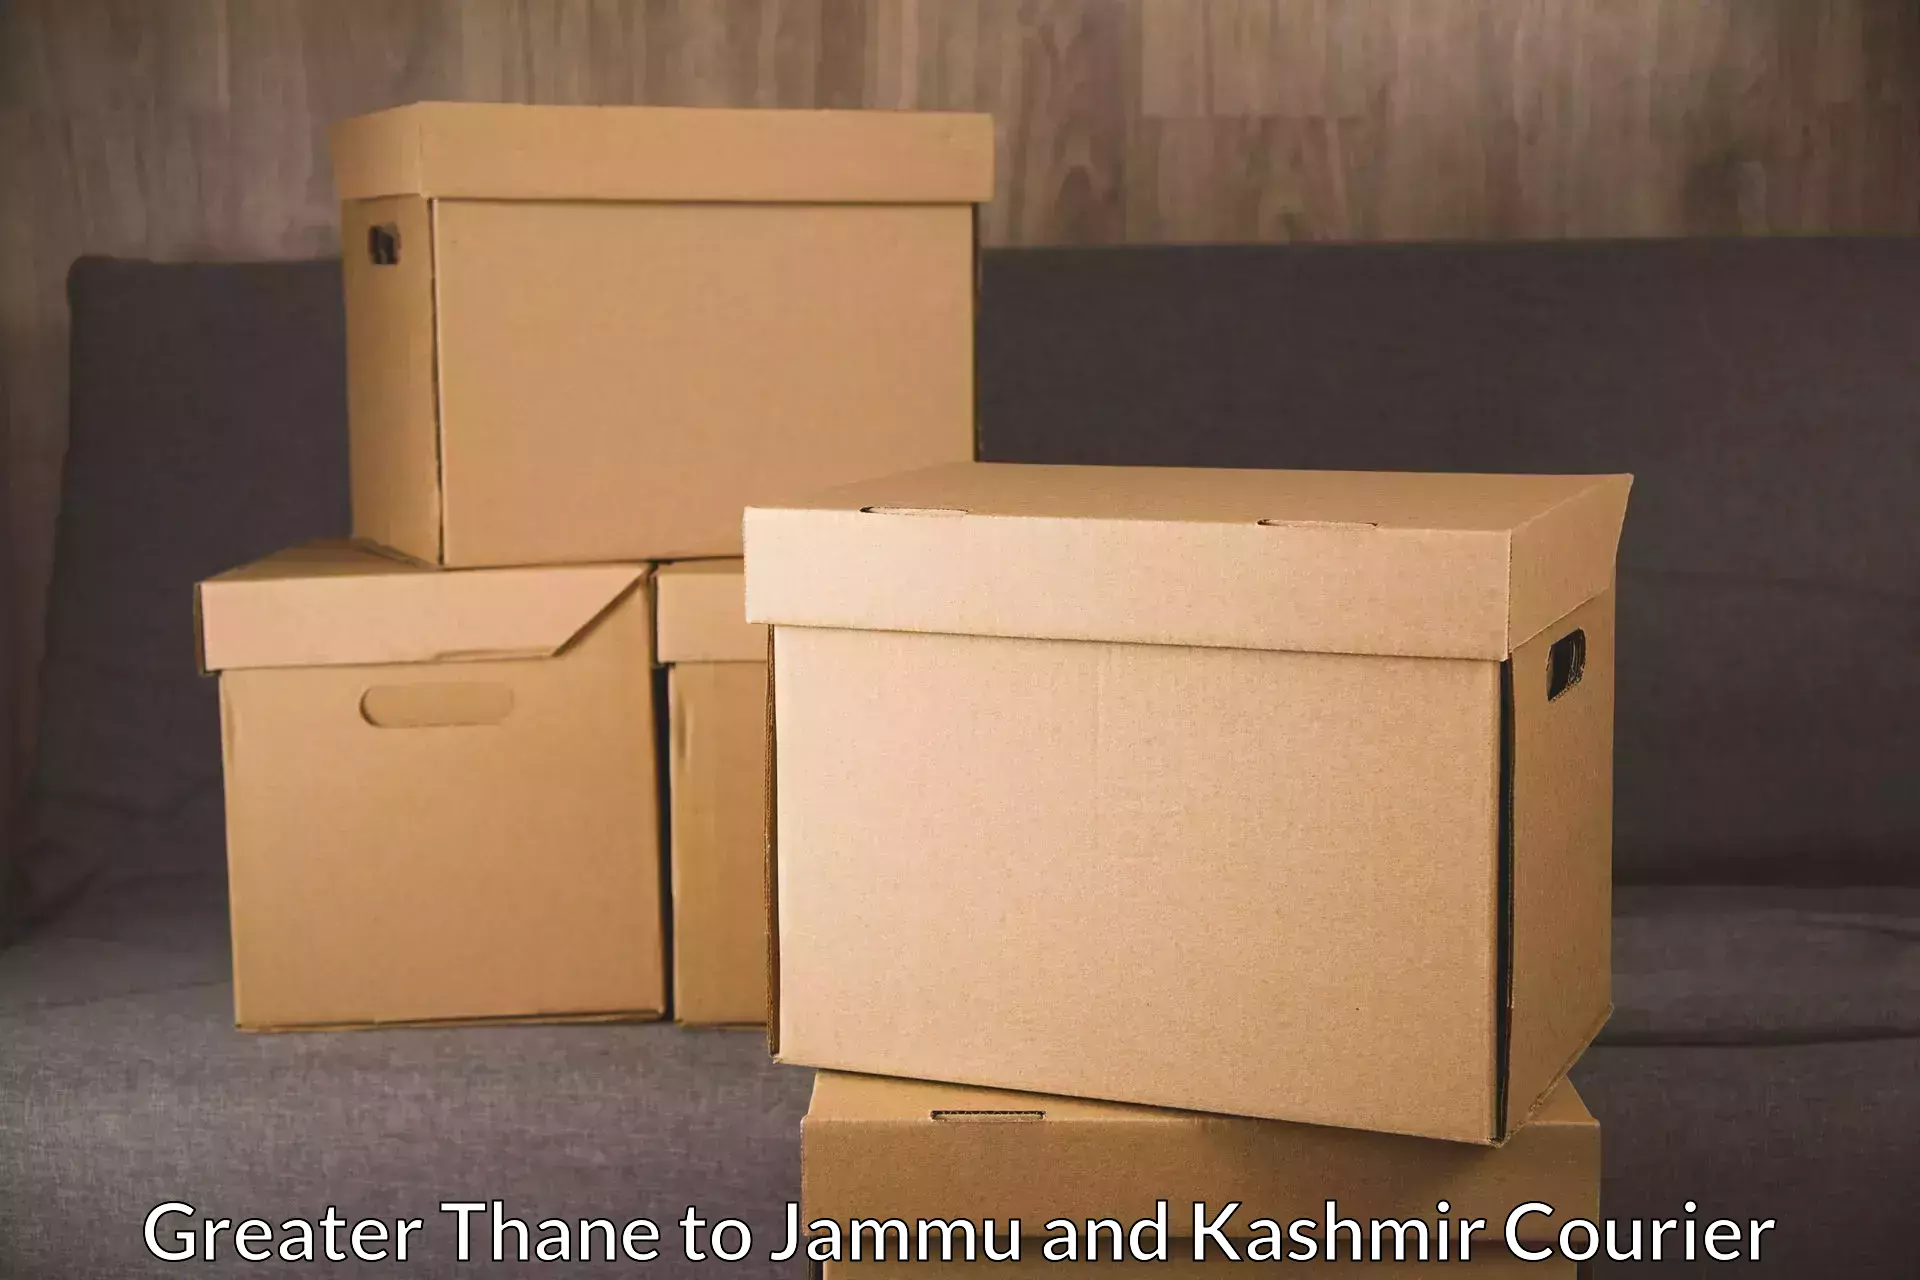 24-hour courier service Greater Thane to Jammu and Kashmir